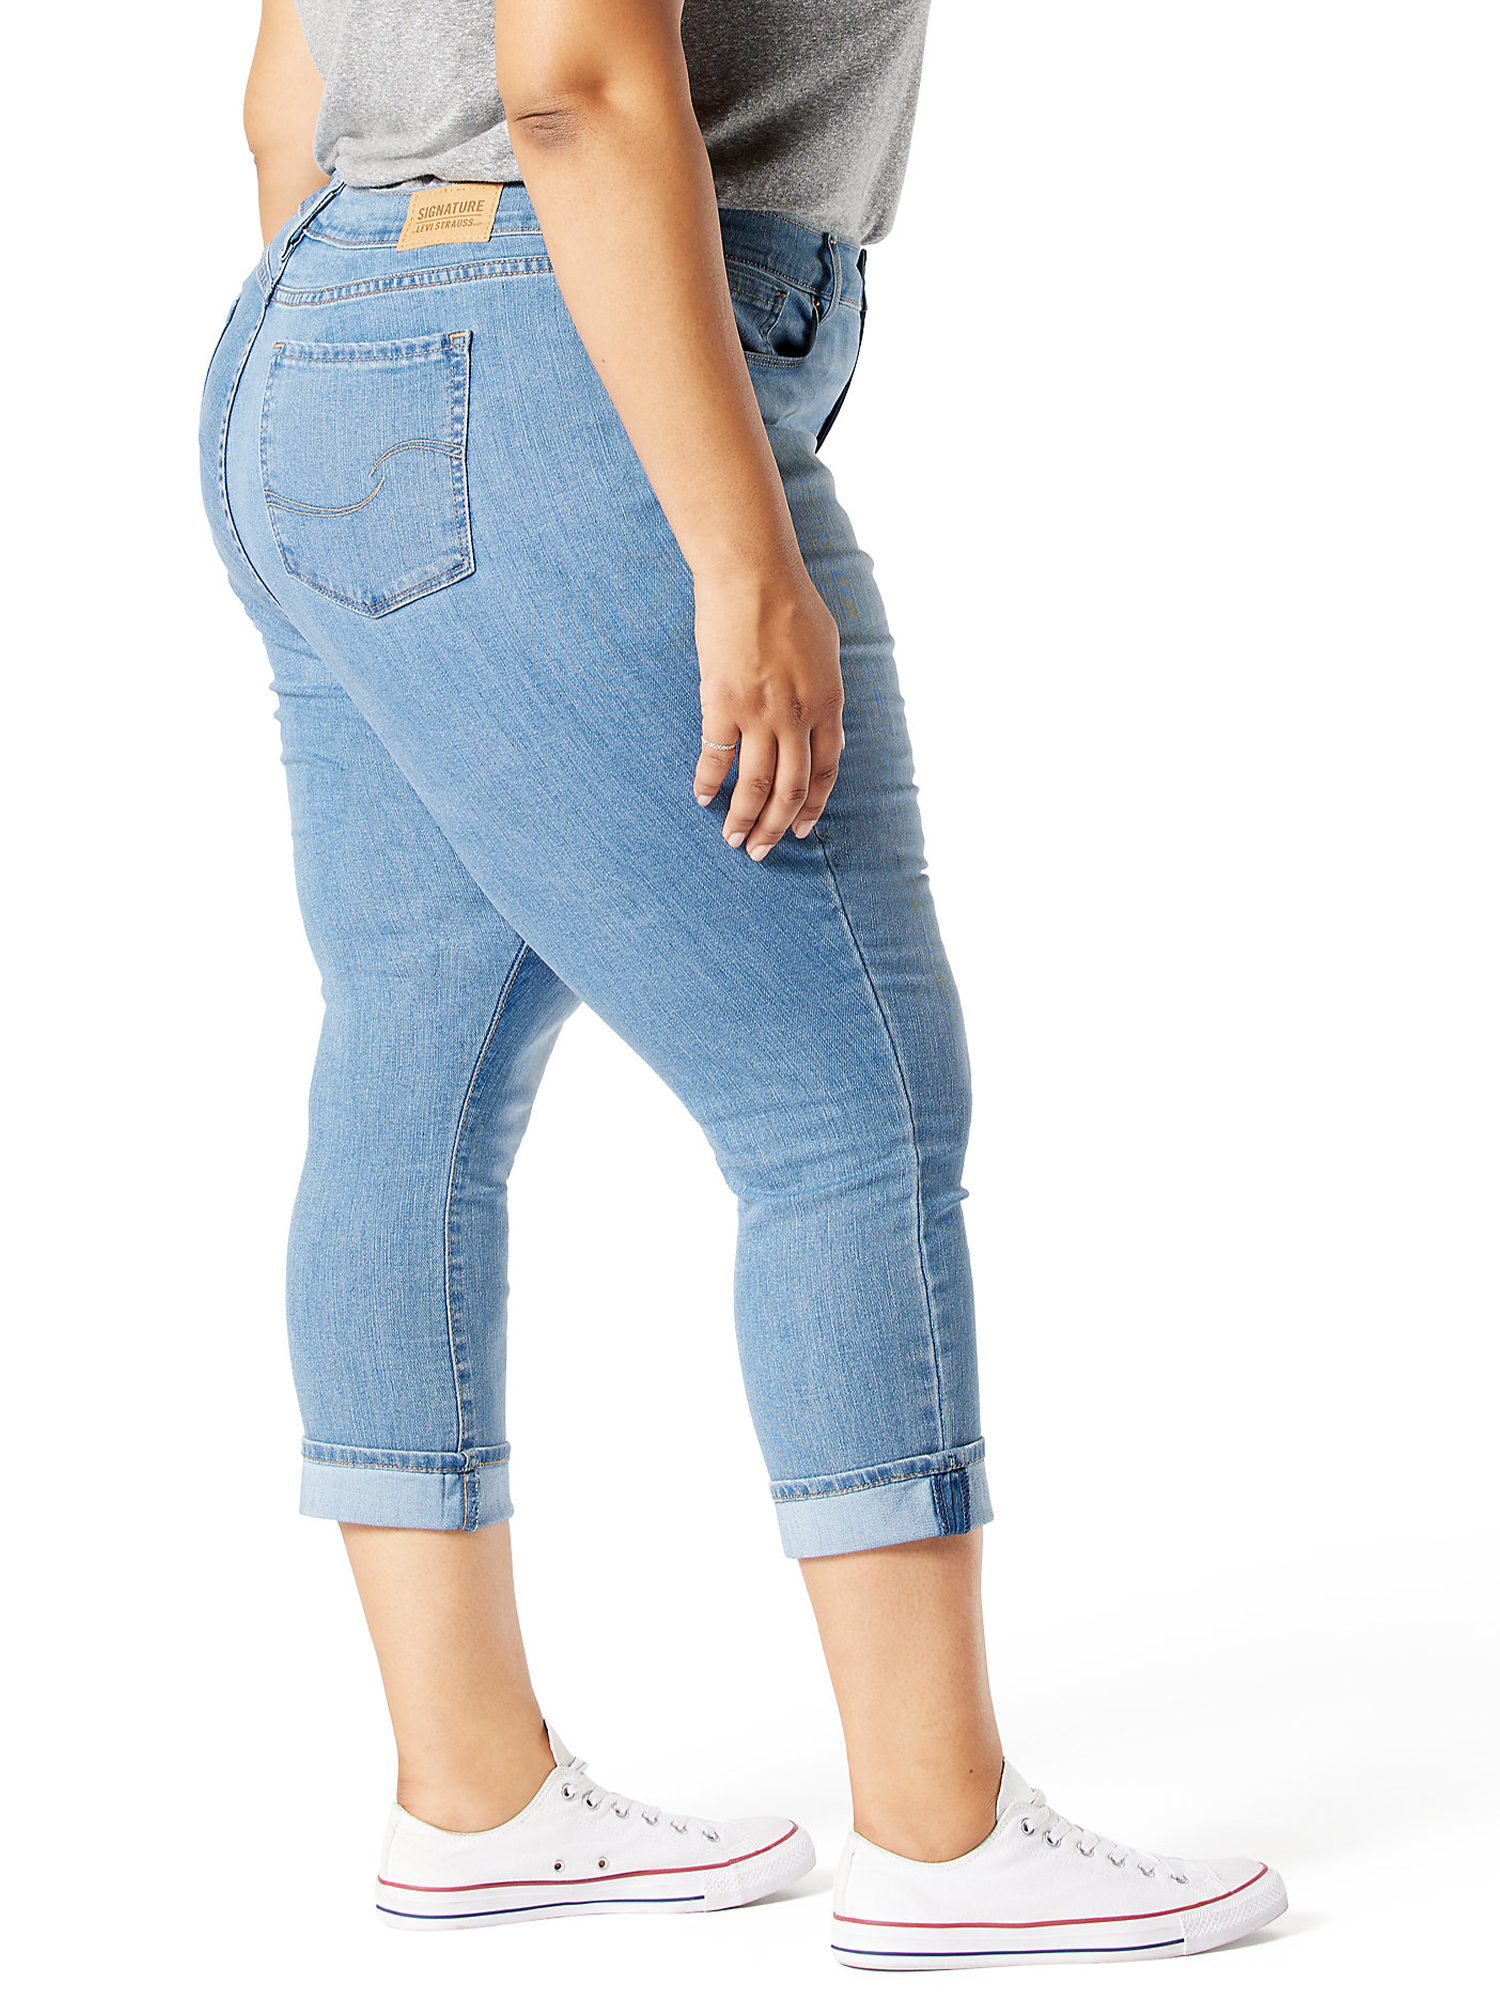 Signature by Levi Strauss & Co. Women's and Women's Plus Mid Rise Capri Jeans, Sizes 0-28 - image 3 of 7